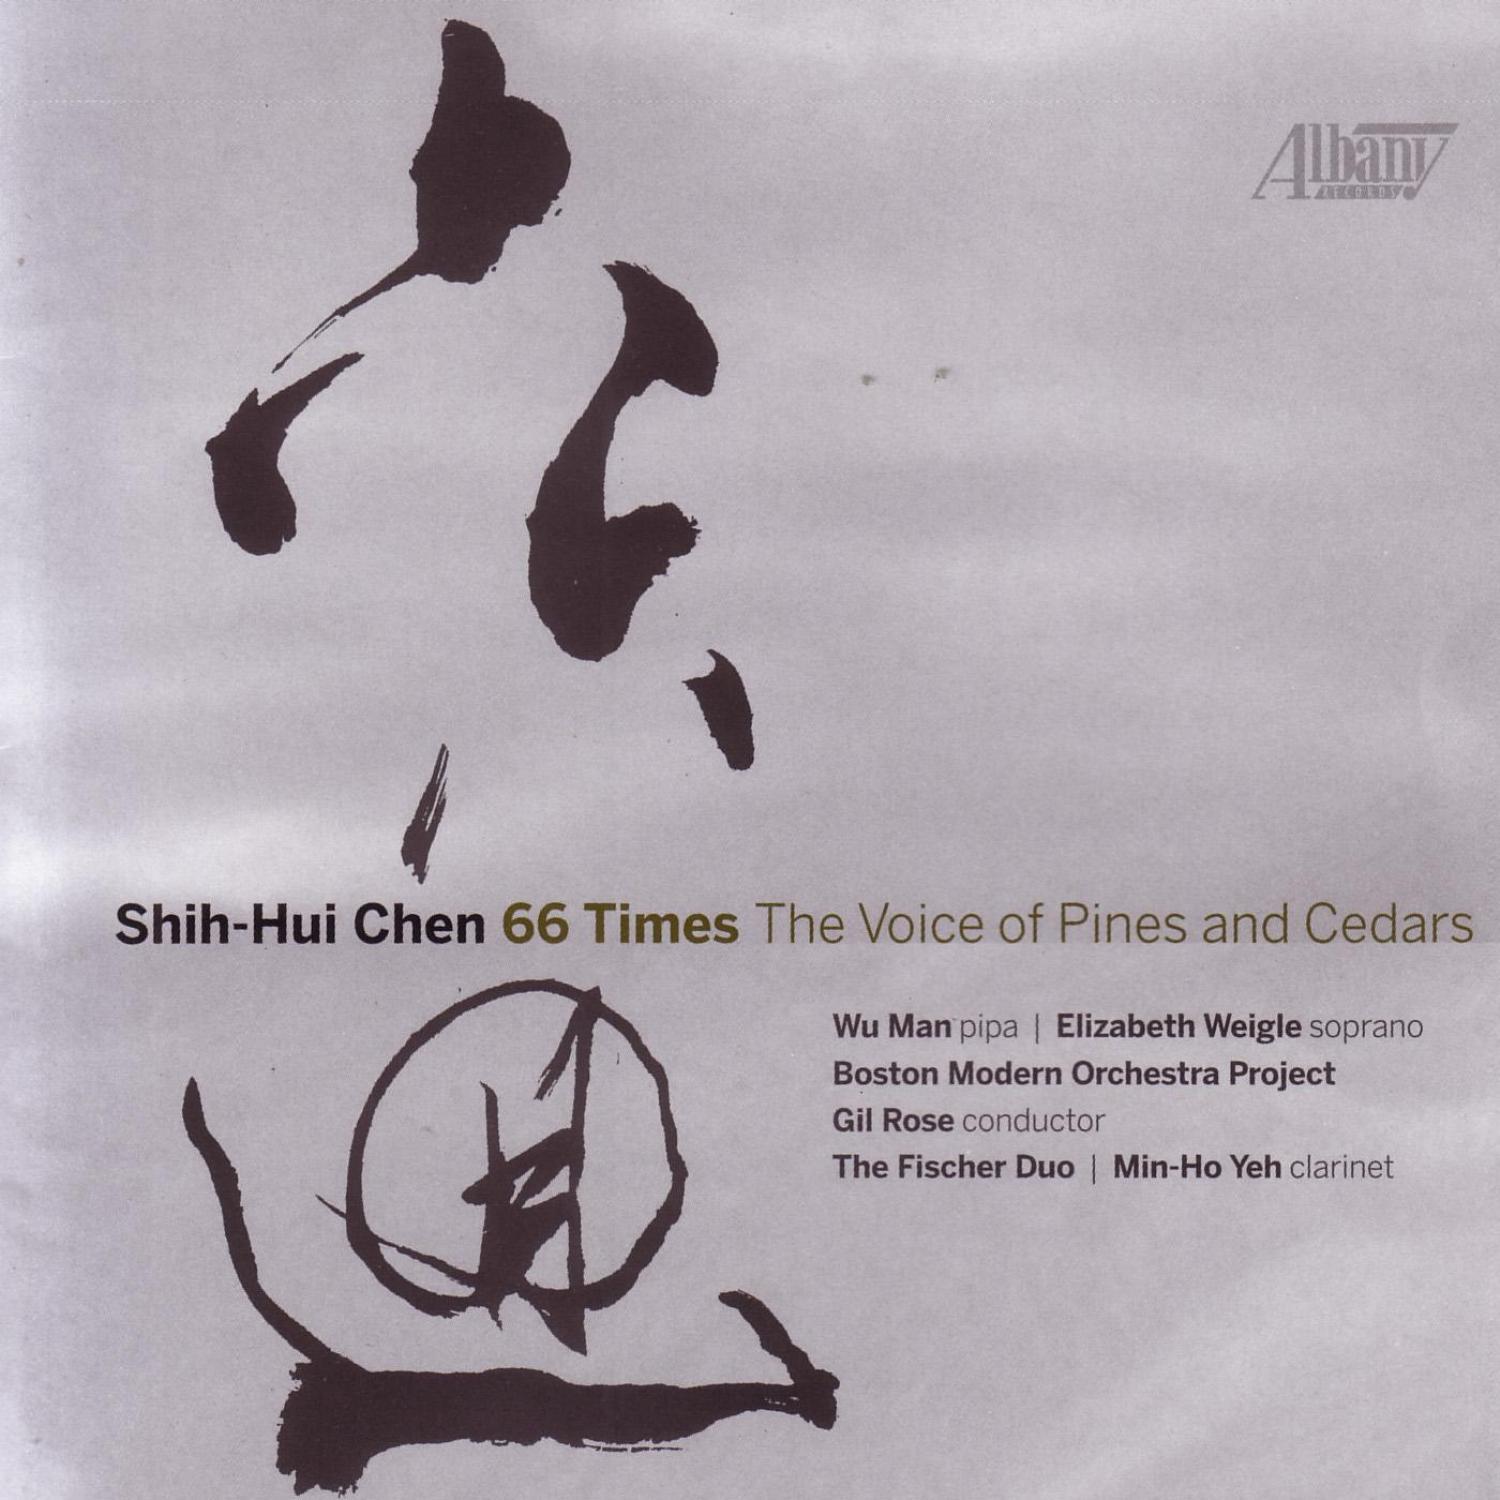 Shih-Hui Chen - 66 Times - The Voice of Pines and Cedars: I